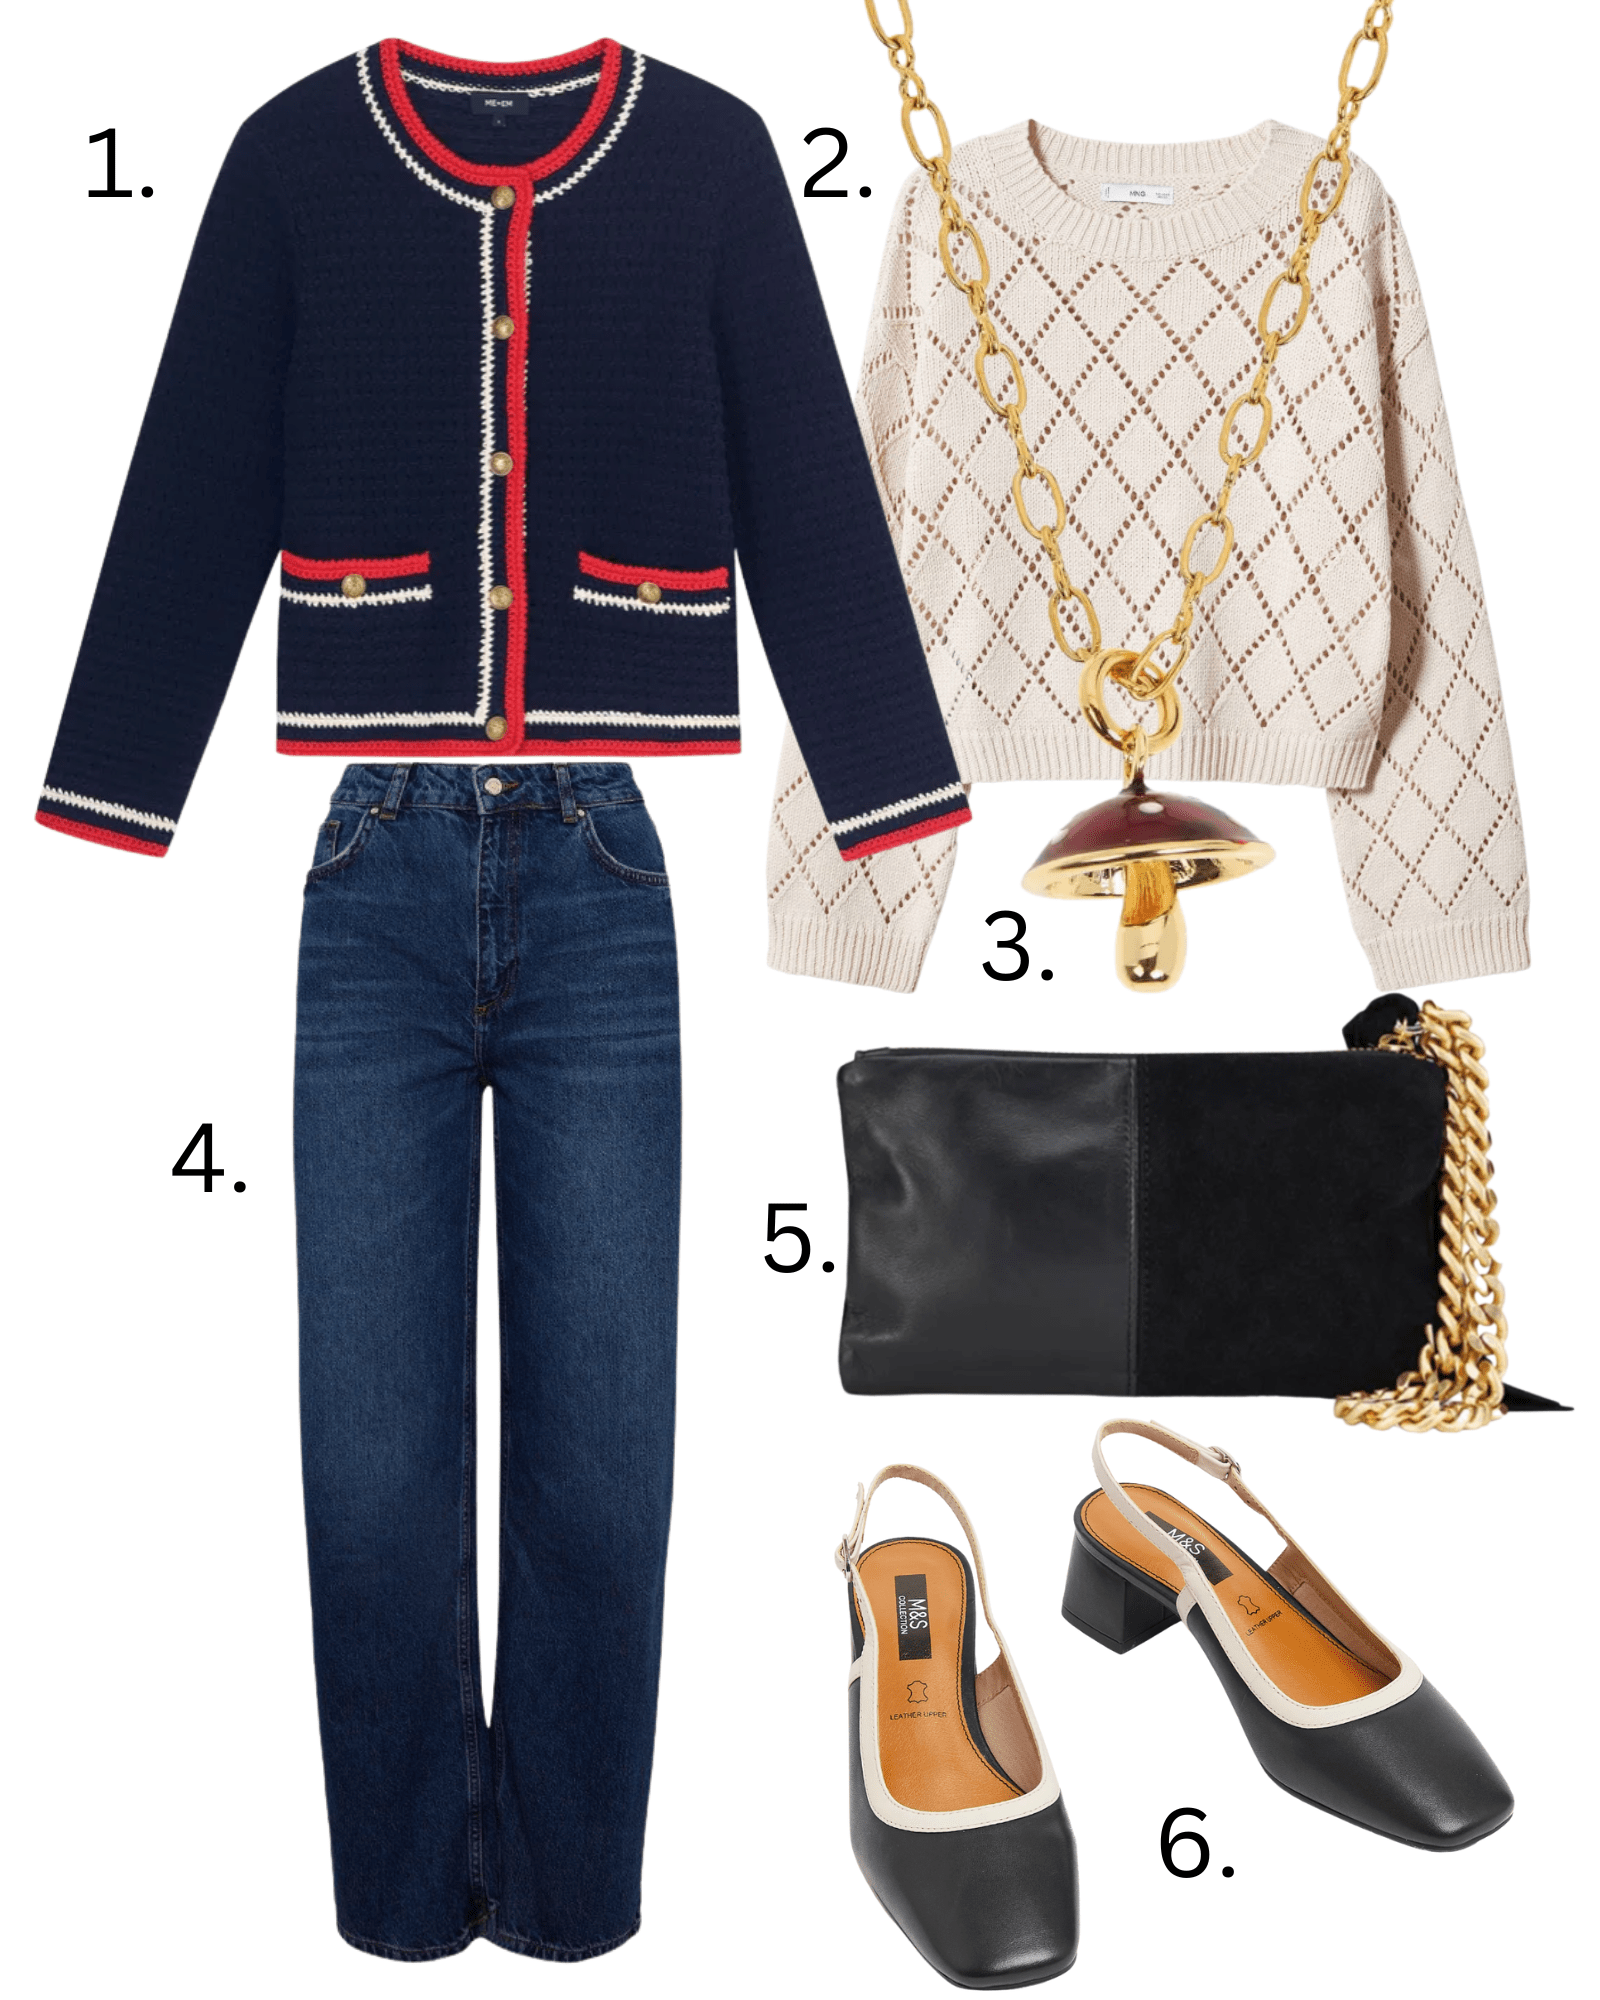 What to wear with your wide leg jeans (or flares)